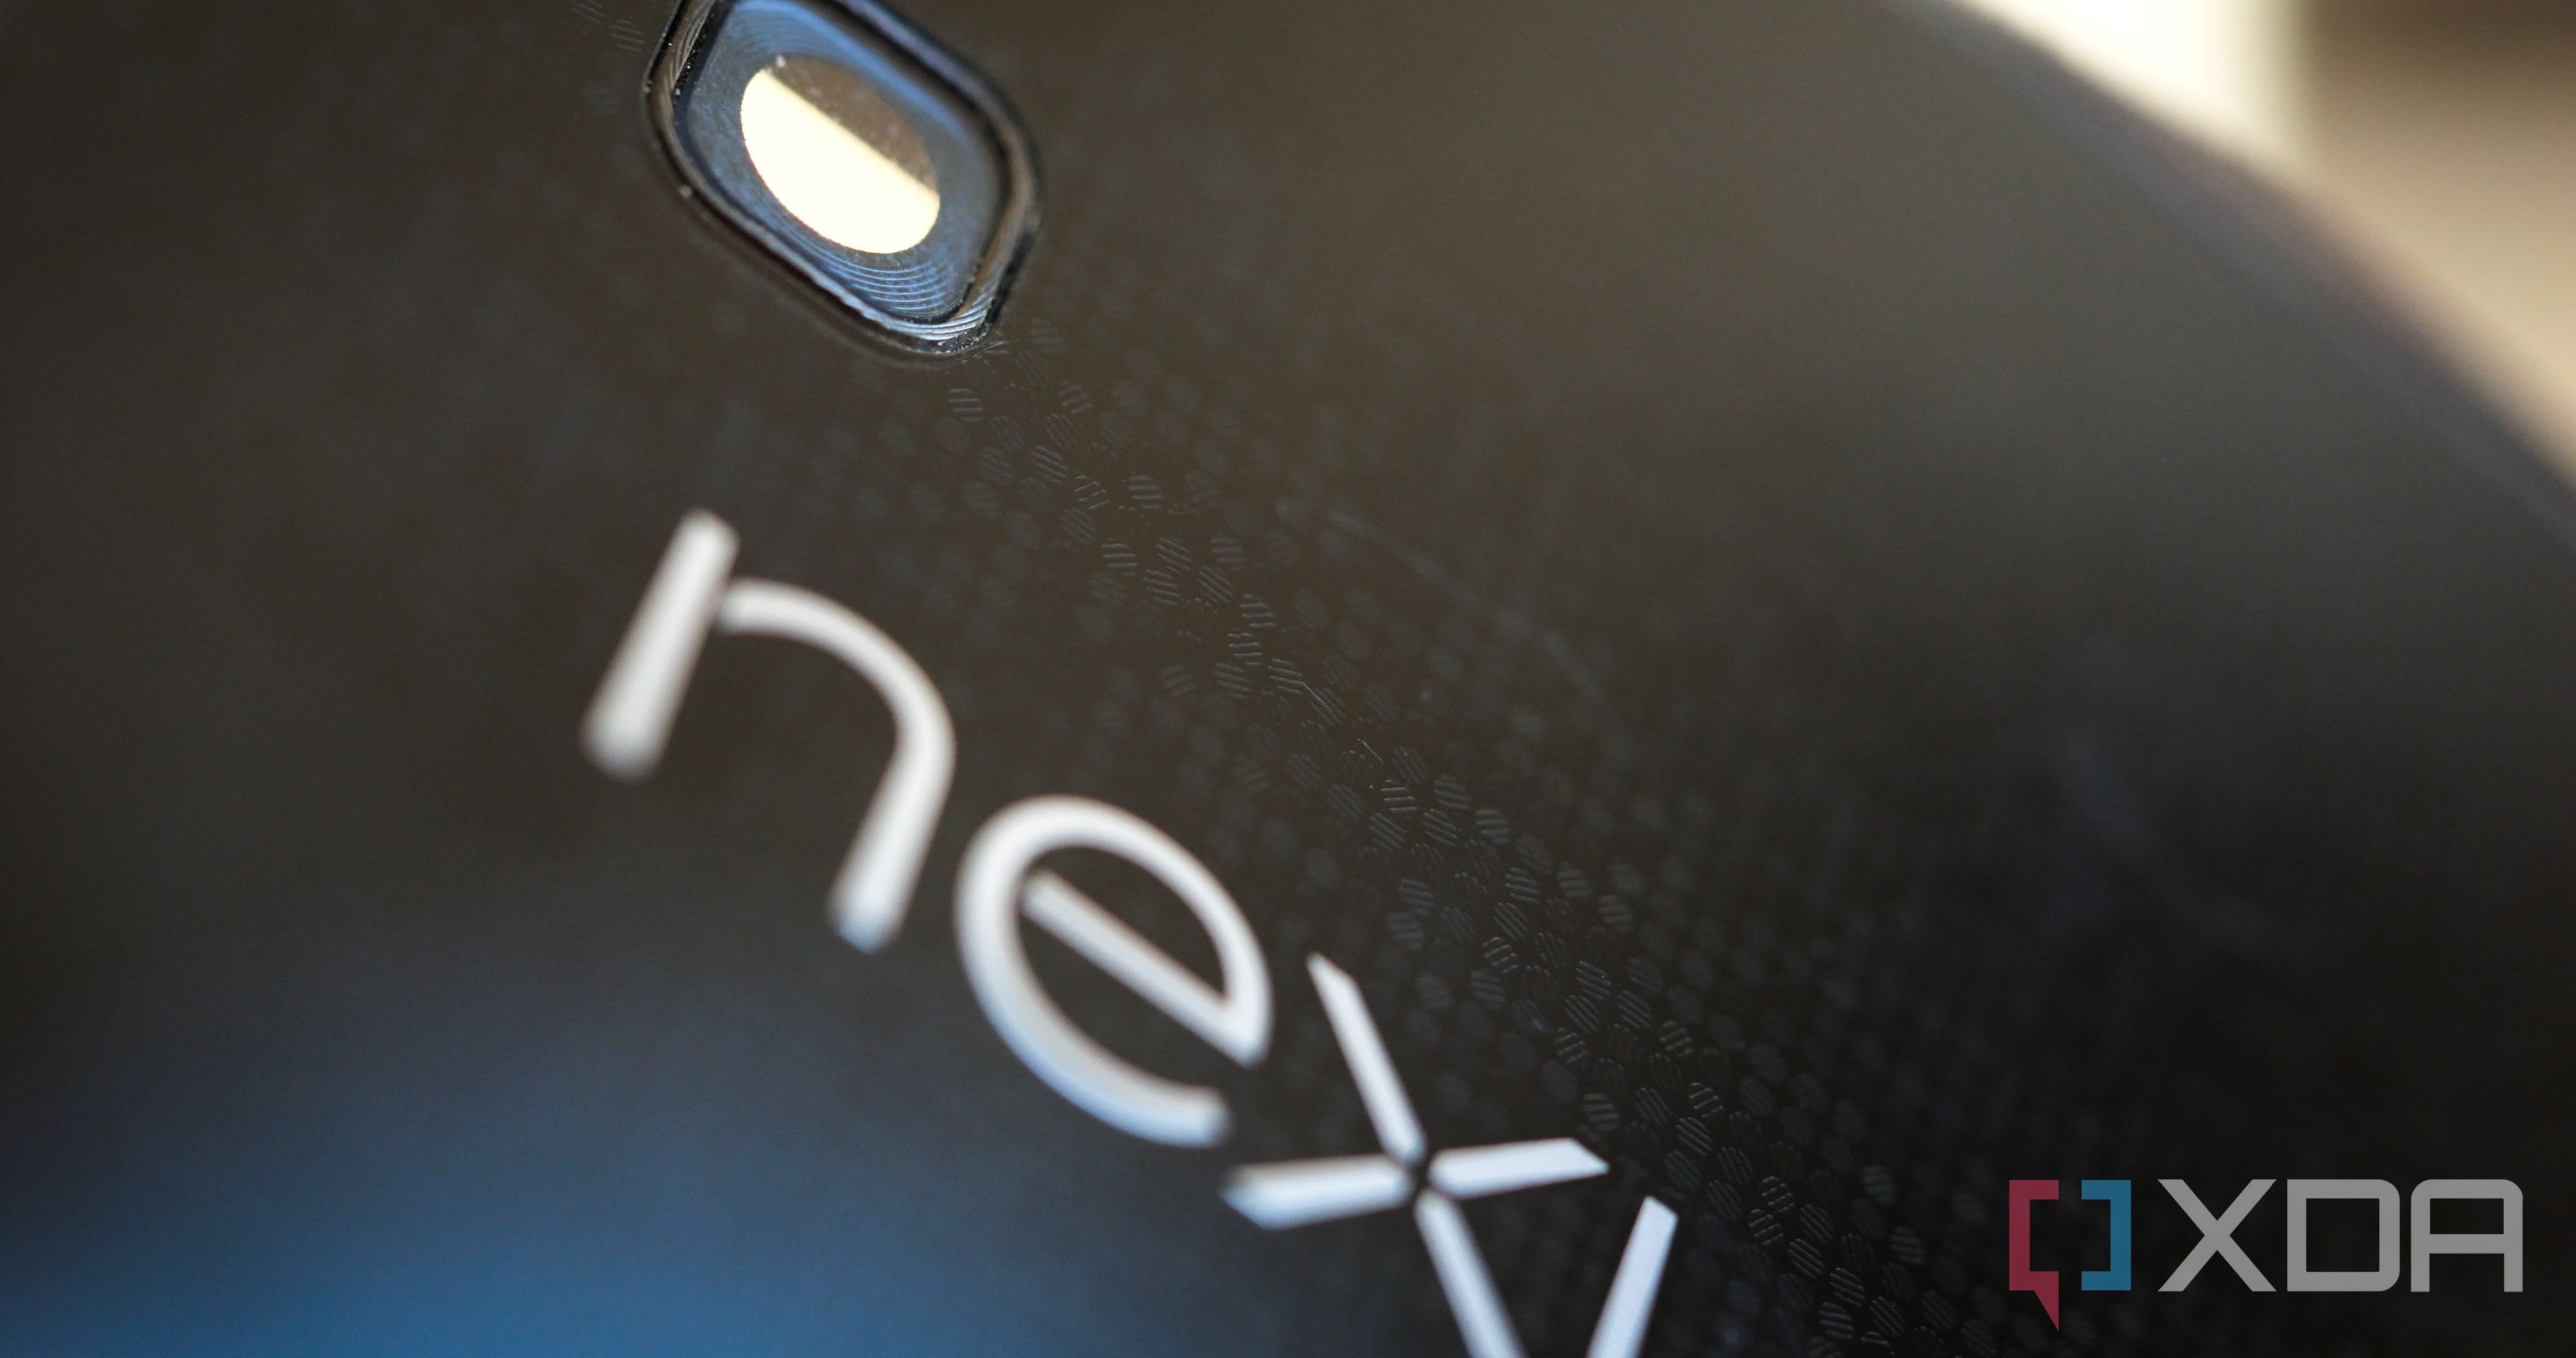 The glass notches on the back of the Google Nexus 4